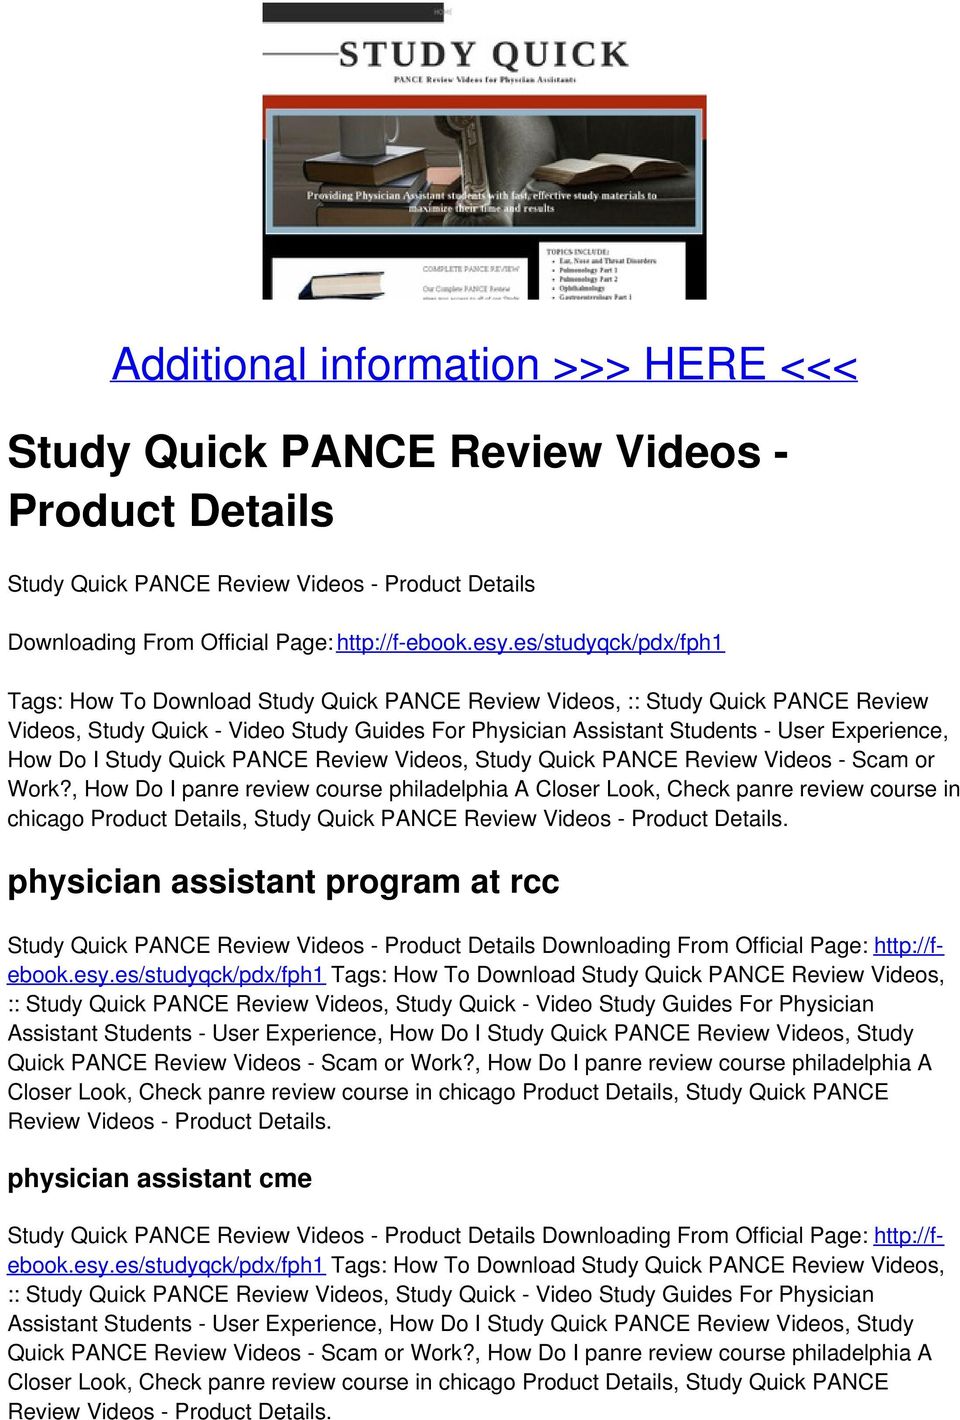 How Do I Study Quick PANCE Review Videos, Study Quick PANCE Review Videos - Scam or Work?